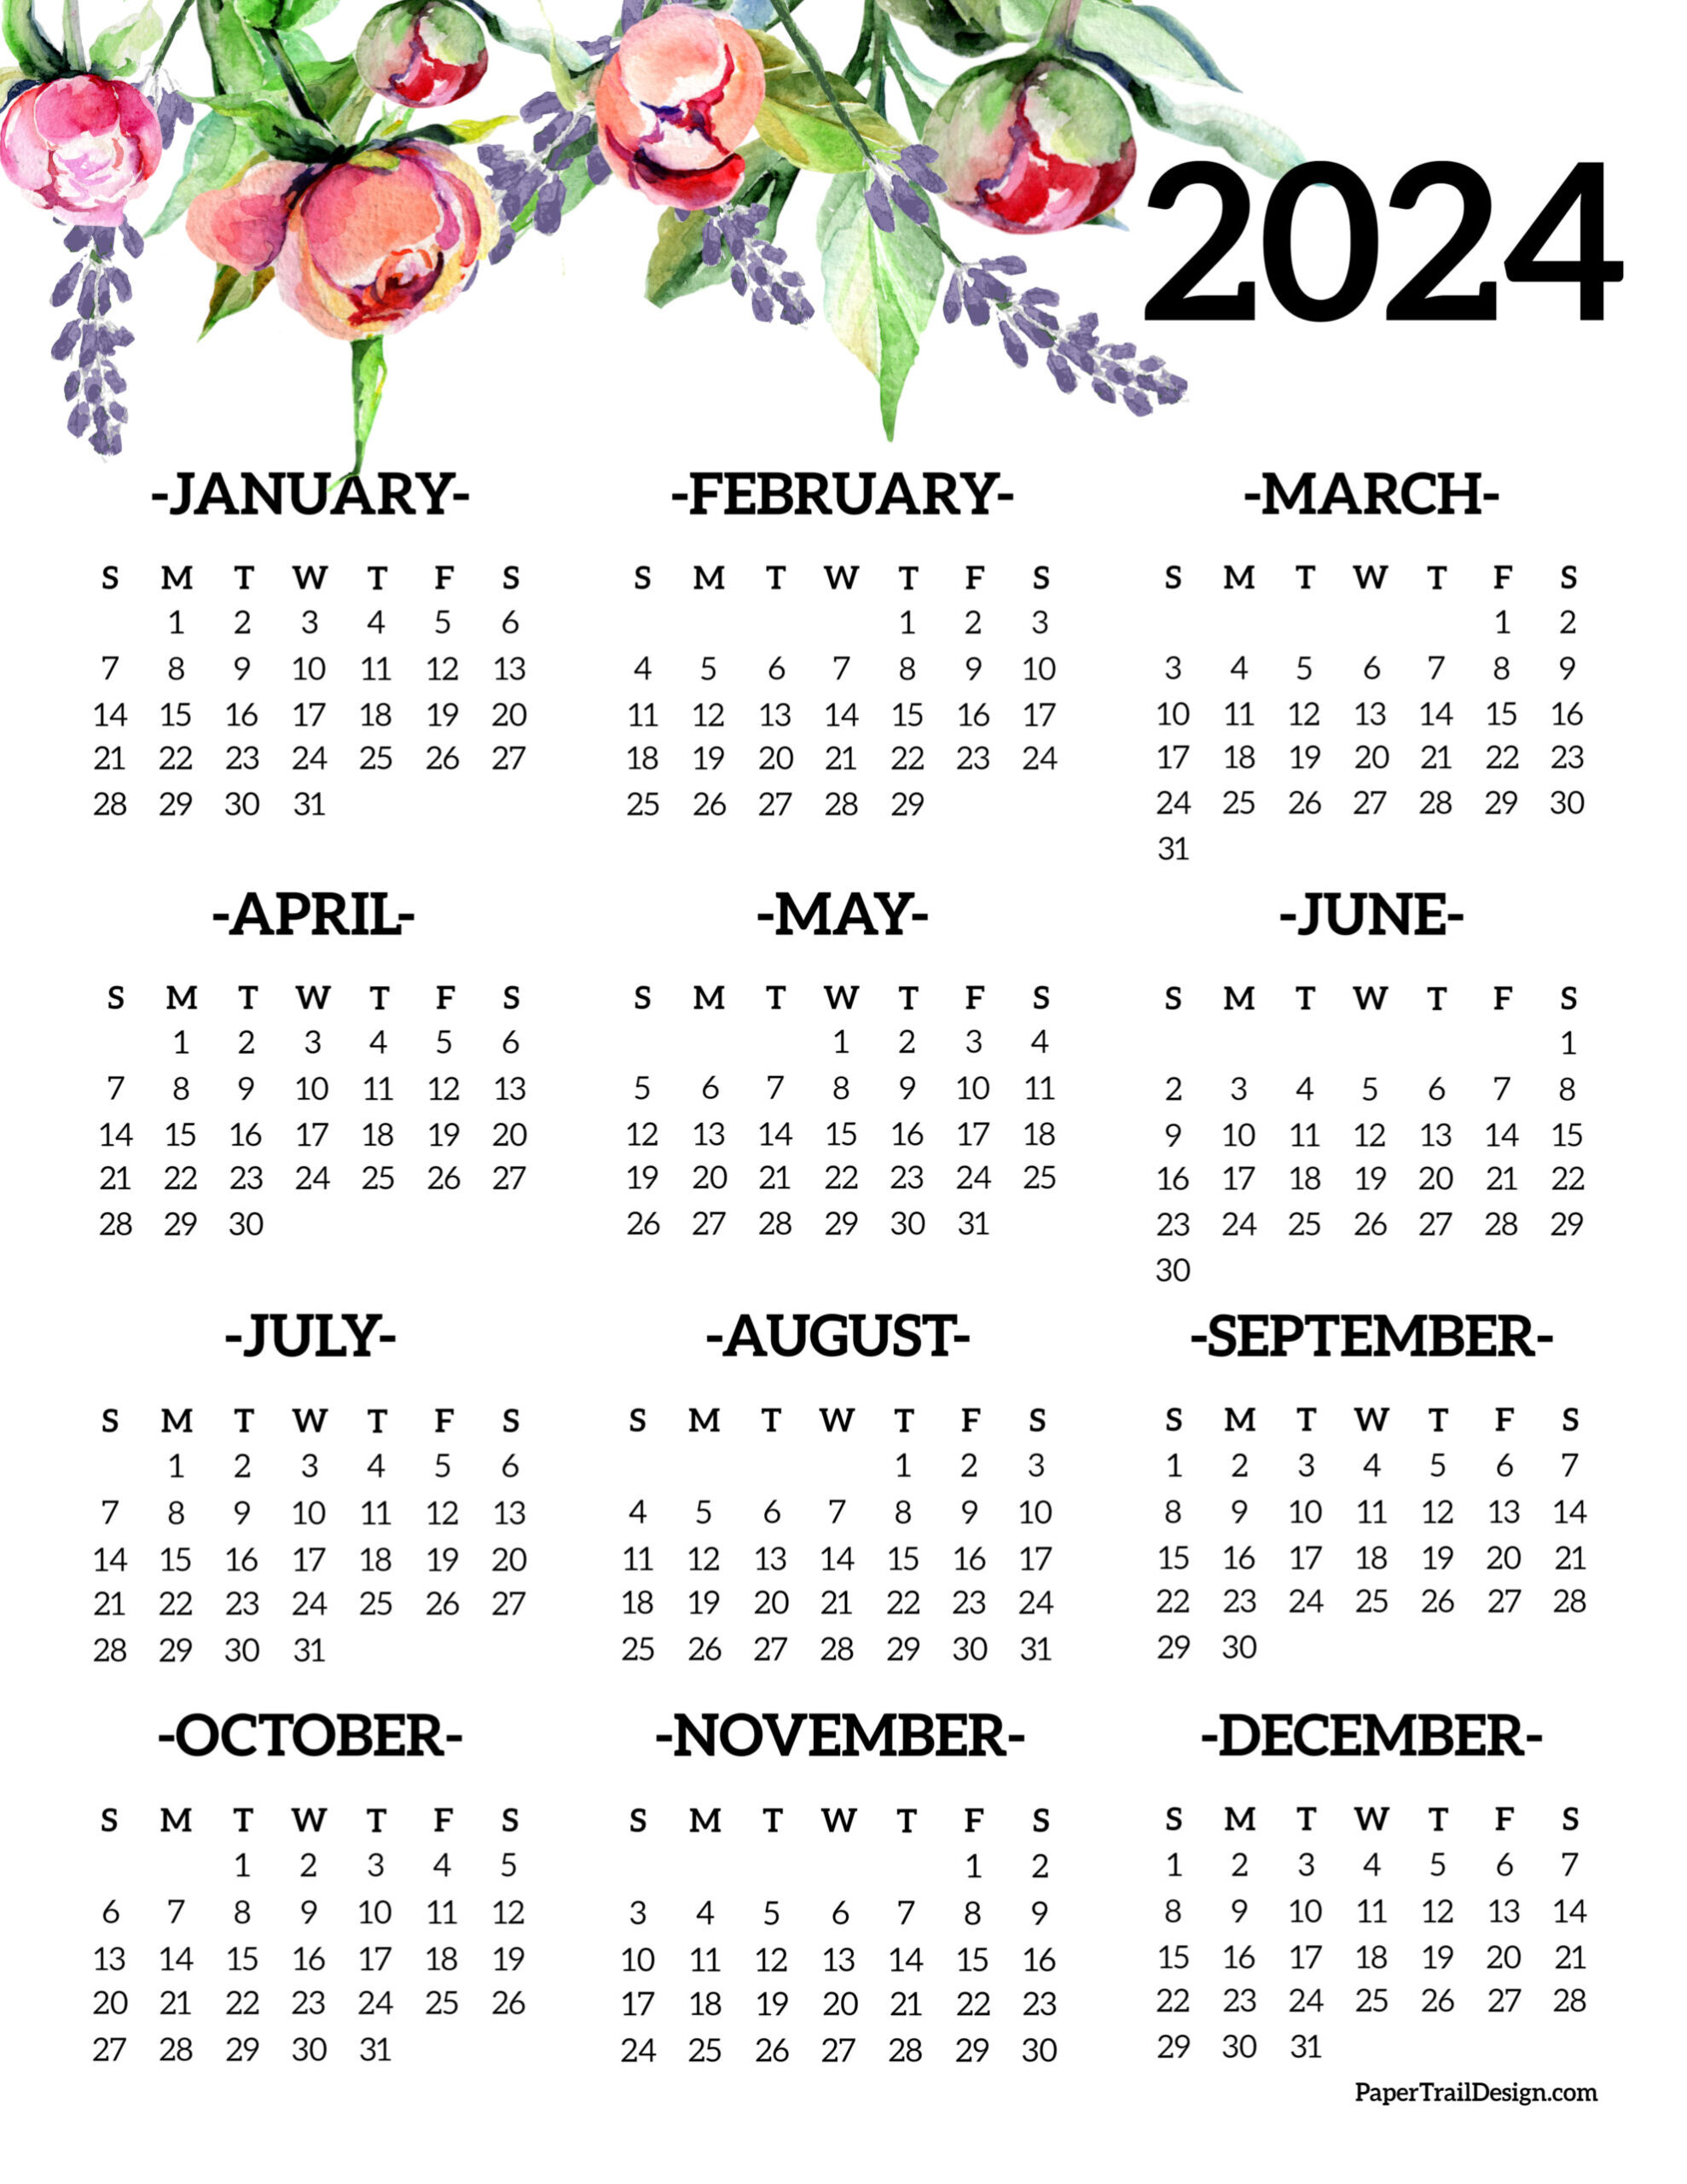 Calendar 2024 Printable One Page - Paper Trail Design for 2024 Year At A Glance Free Printable Calendar